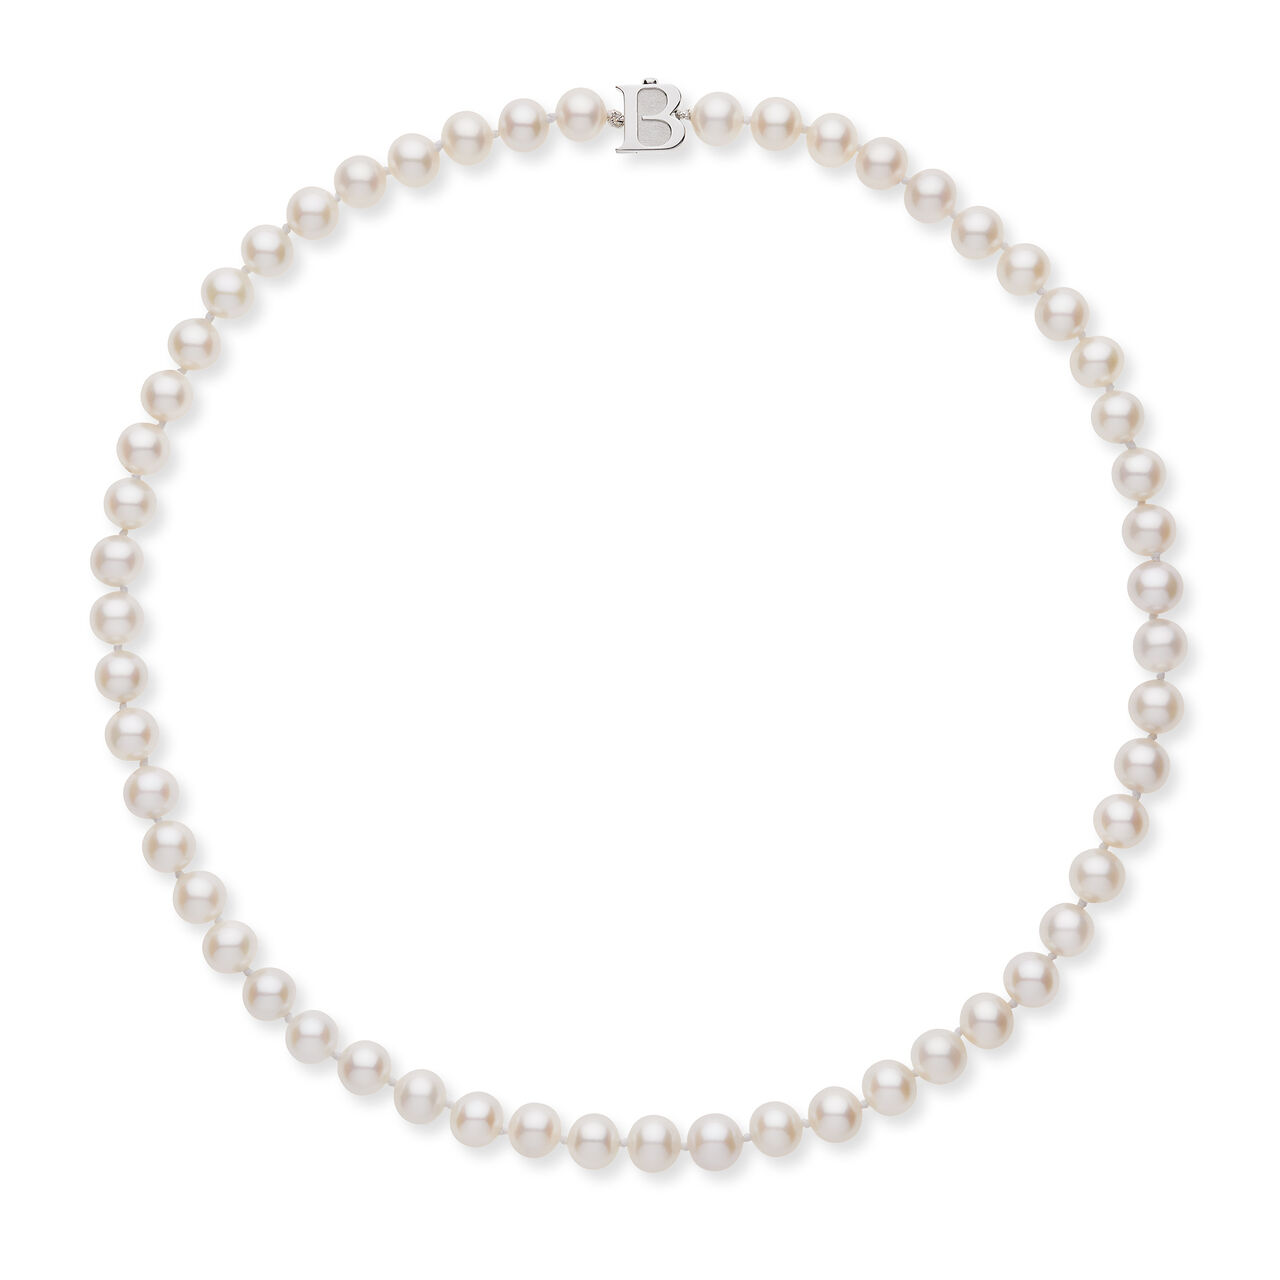 Birks Essentials 7.5-8 mm Cultured Freshwater Pearl Necklace in Sterling Silver 450017311239 image number 0